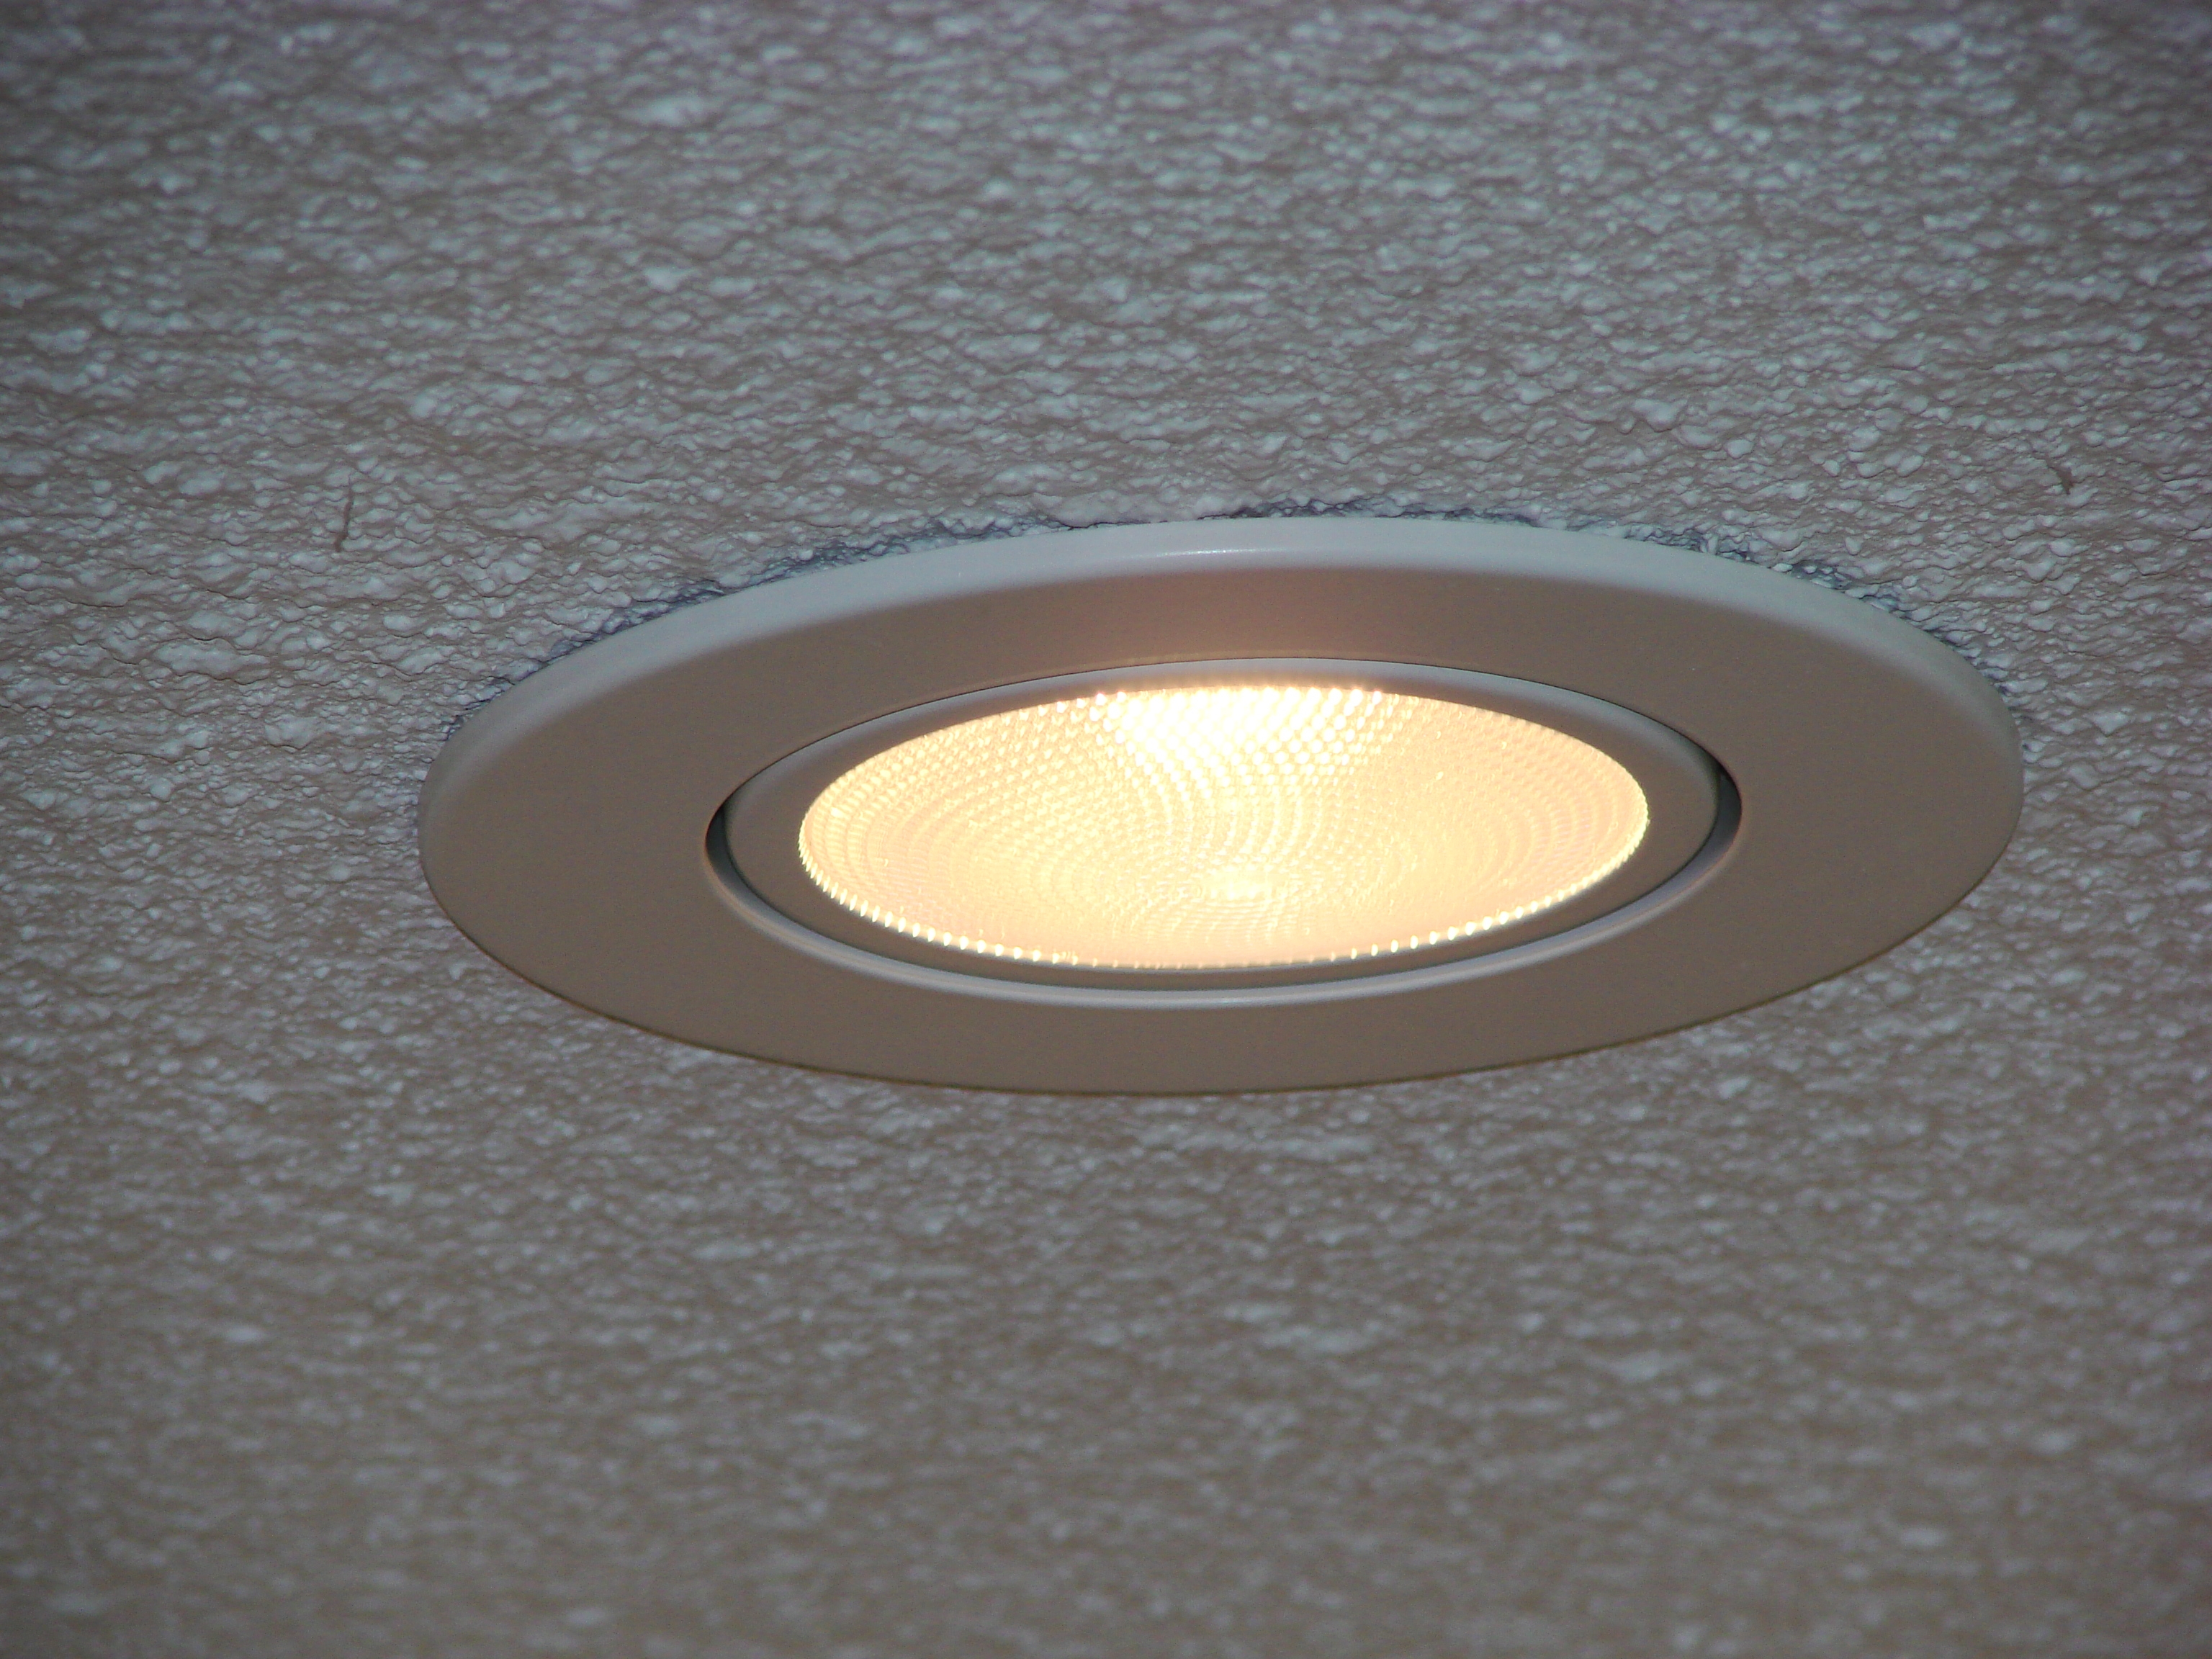 Recessed Ceiling Light Covers